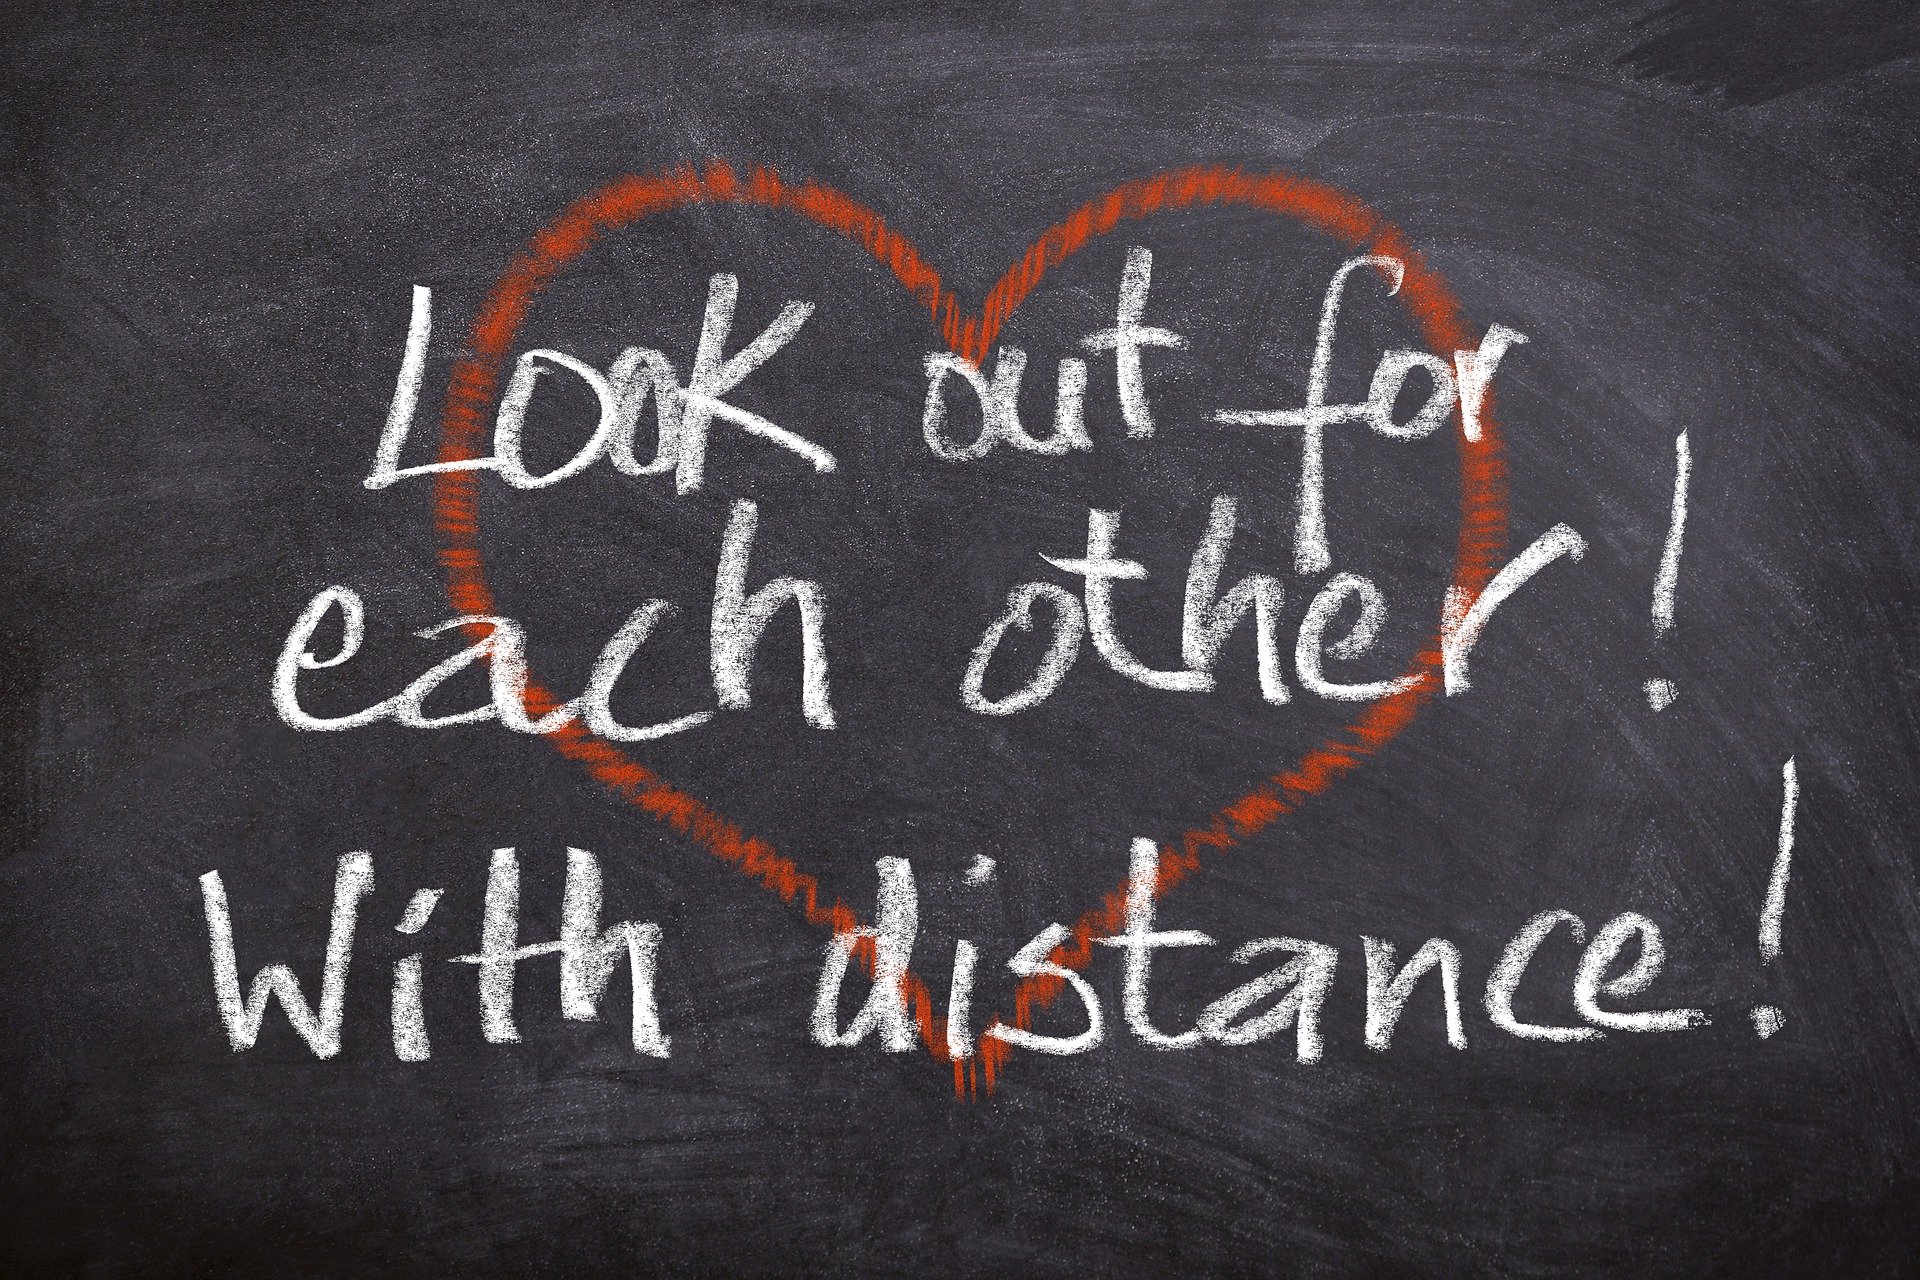 Look out for each other! With distance!